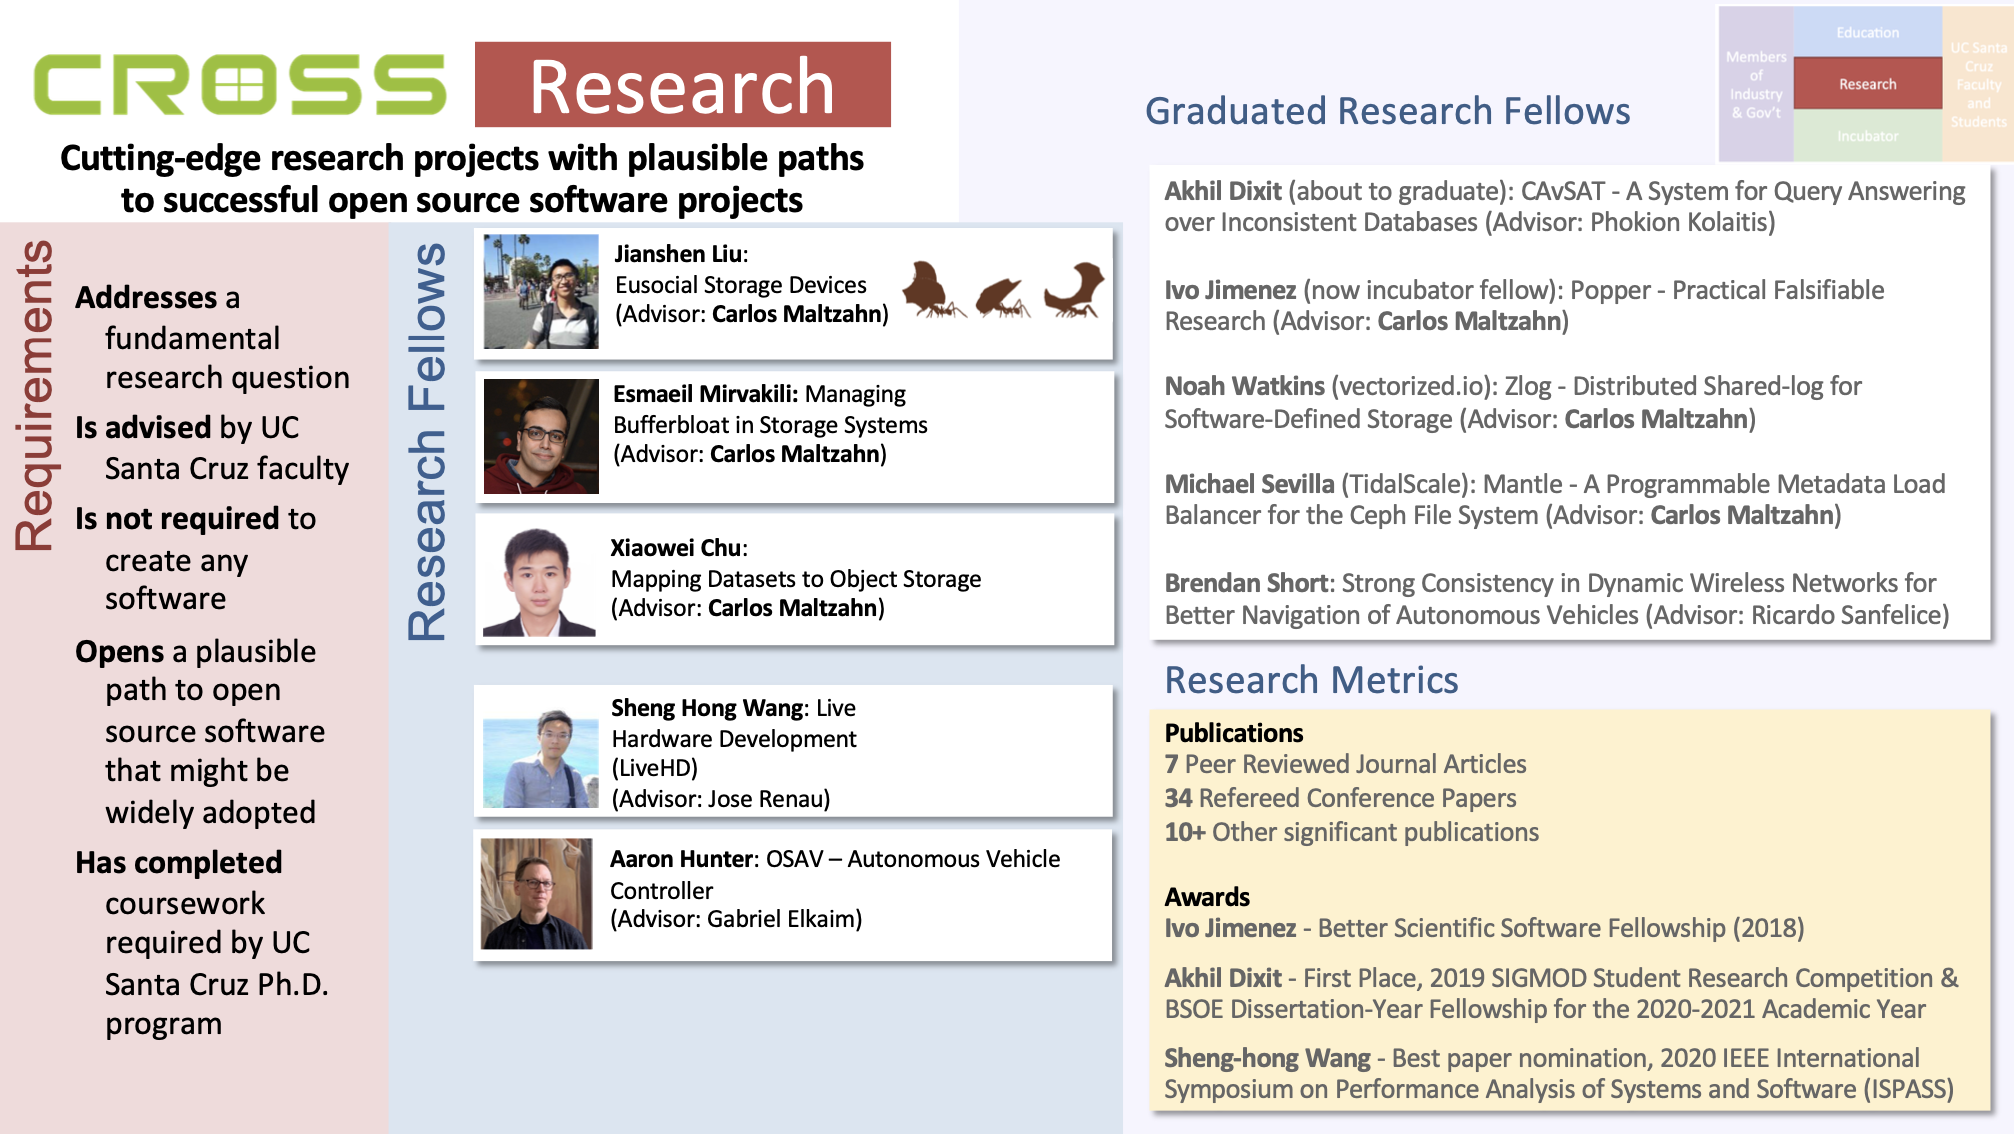 CROSS Research fellows, requirements, current fellows, and graduated fellows.